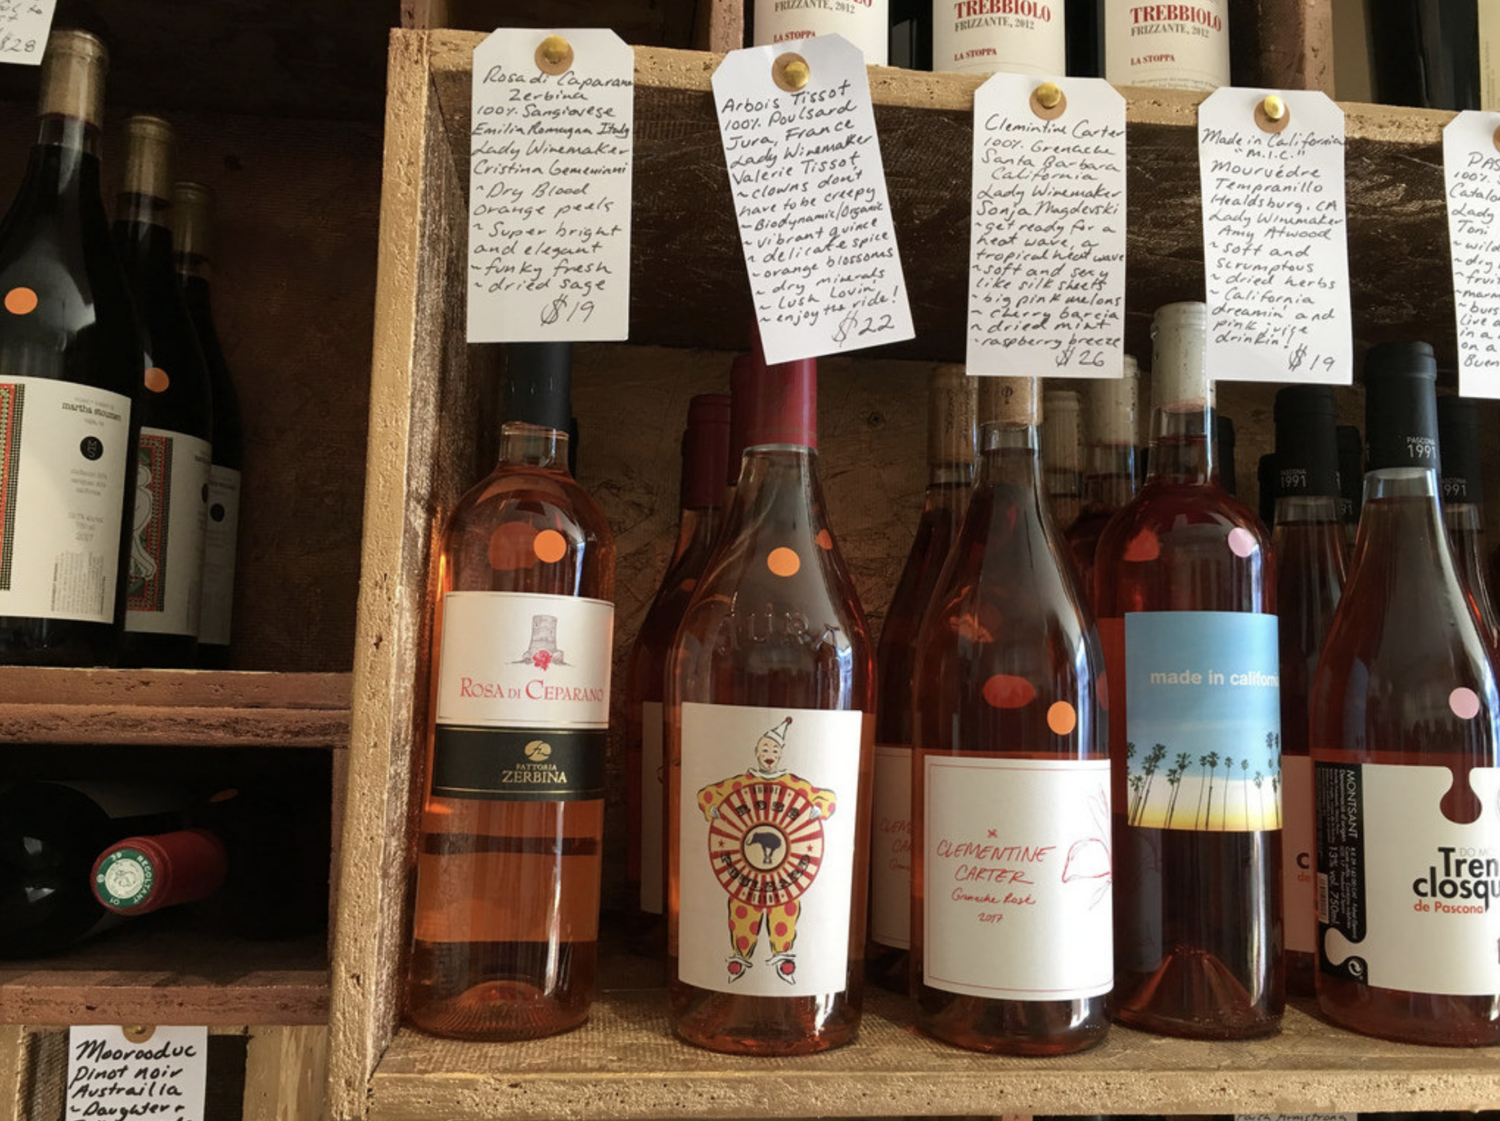 Closeup of wine bottles and hand written tasting notes